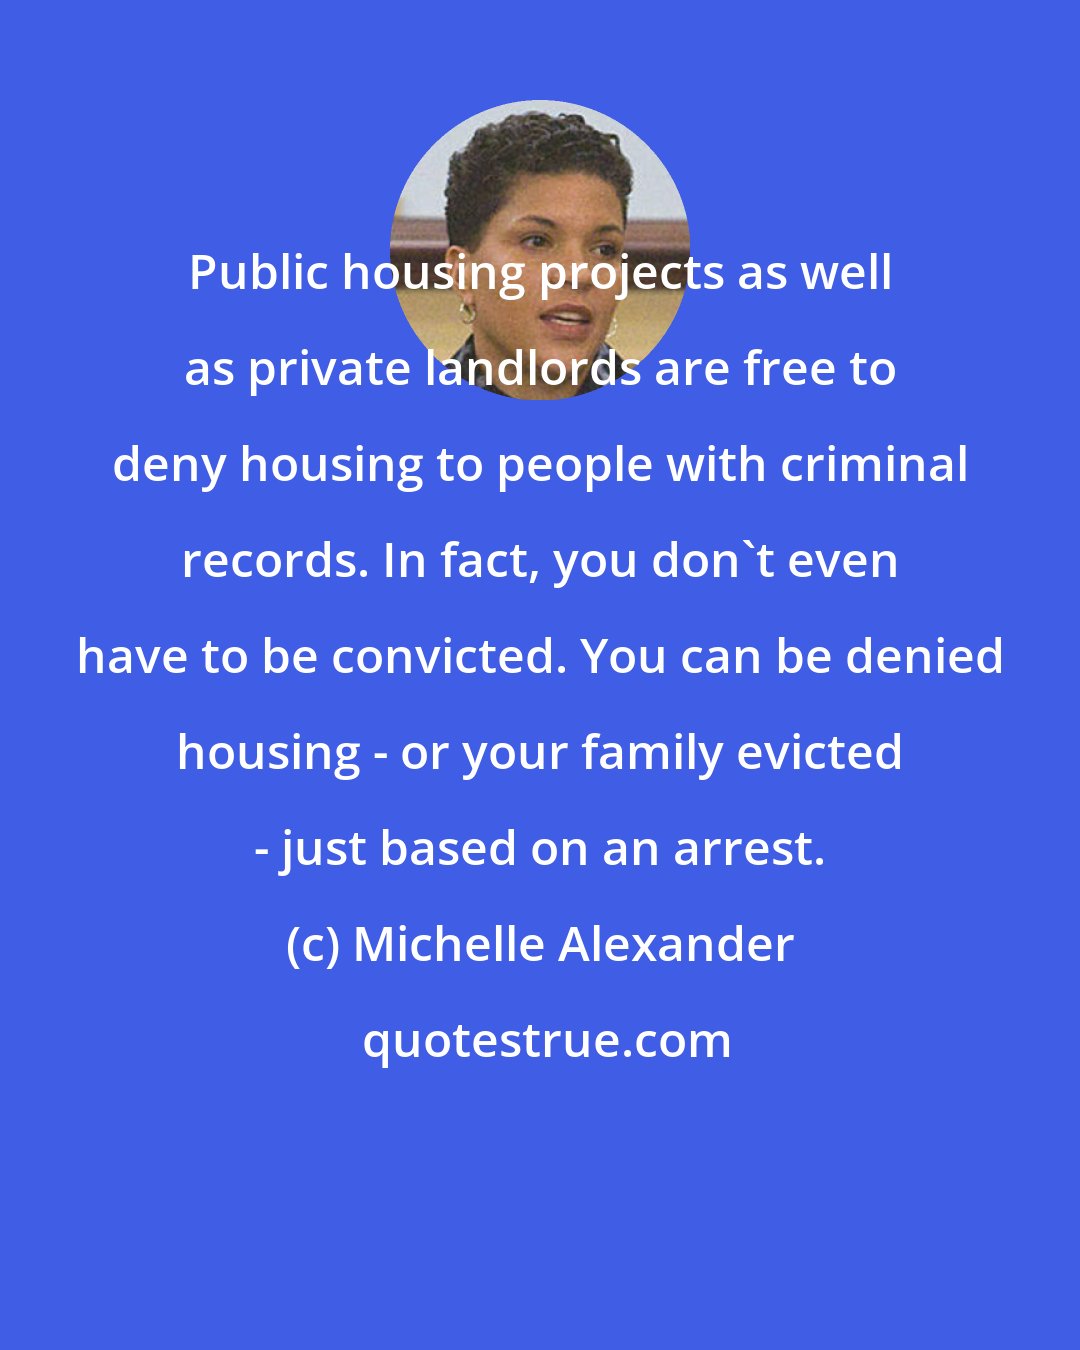 Michelle Alexander: Public housing projects as well as private landlords are free to deny housing to people with criminal records. In fact, you don't even have to be convicted. You can be denied housing - or your family evicted - just based on an arrest.